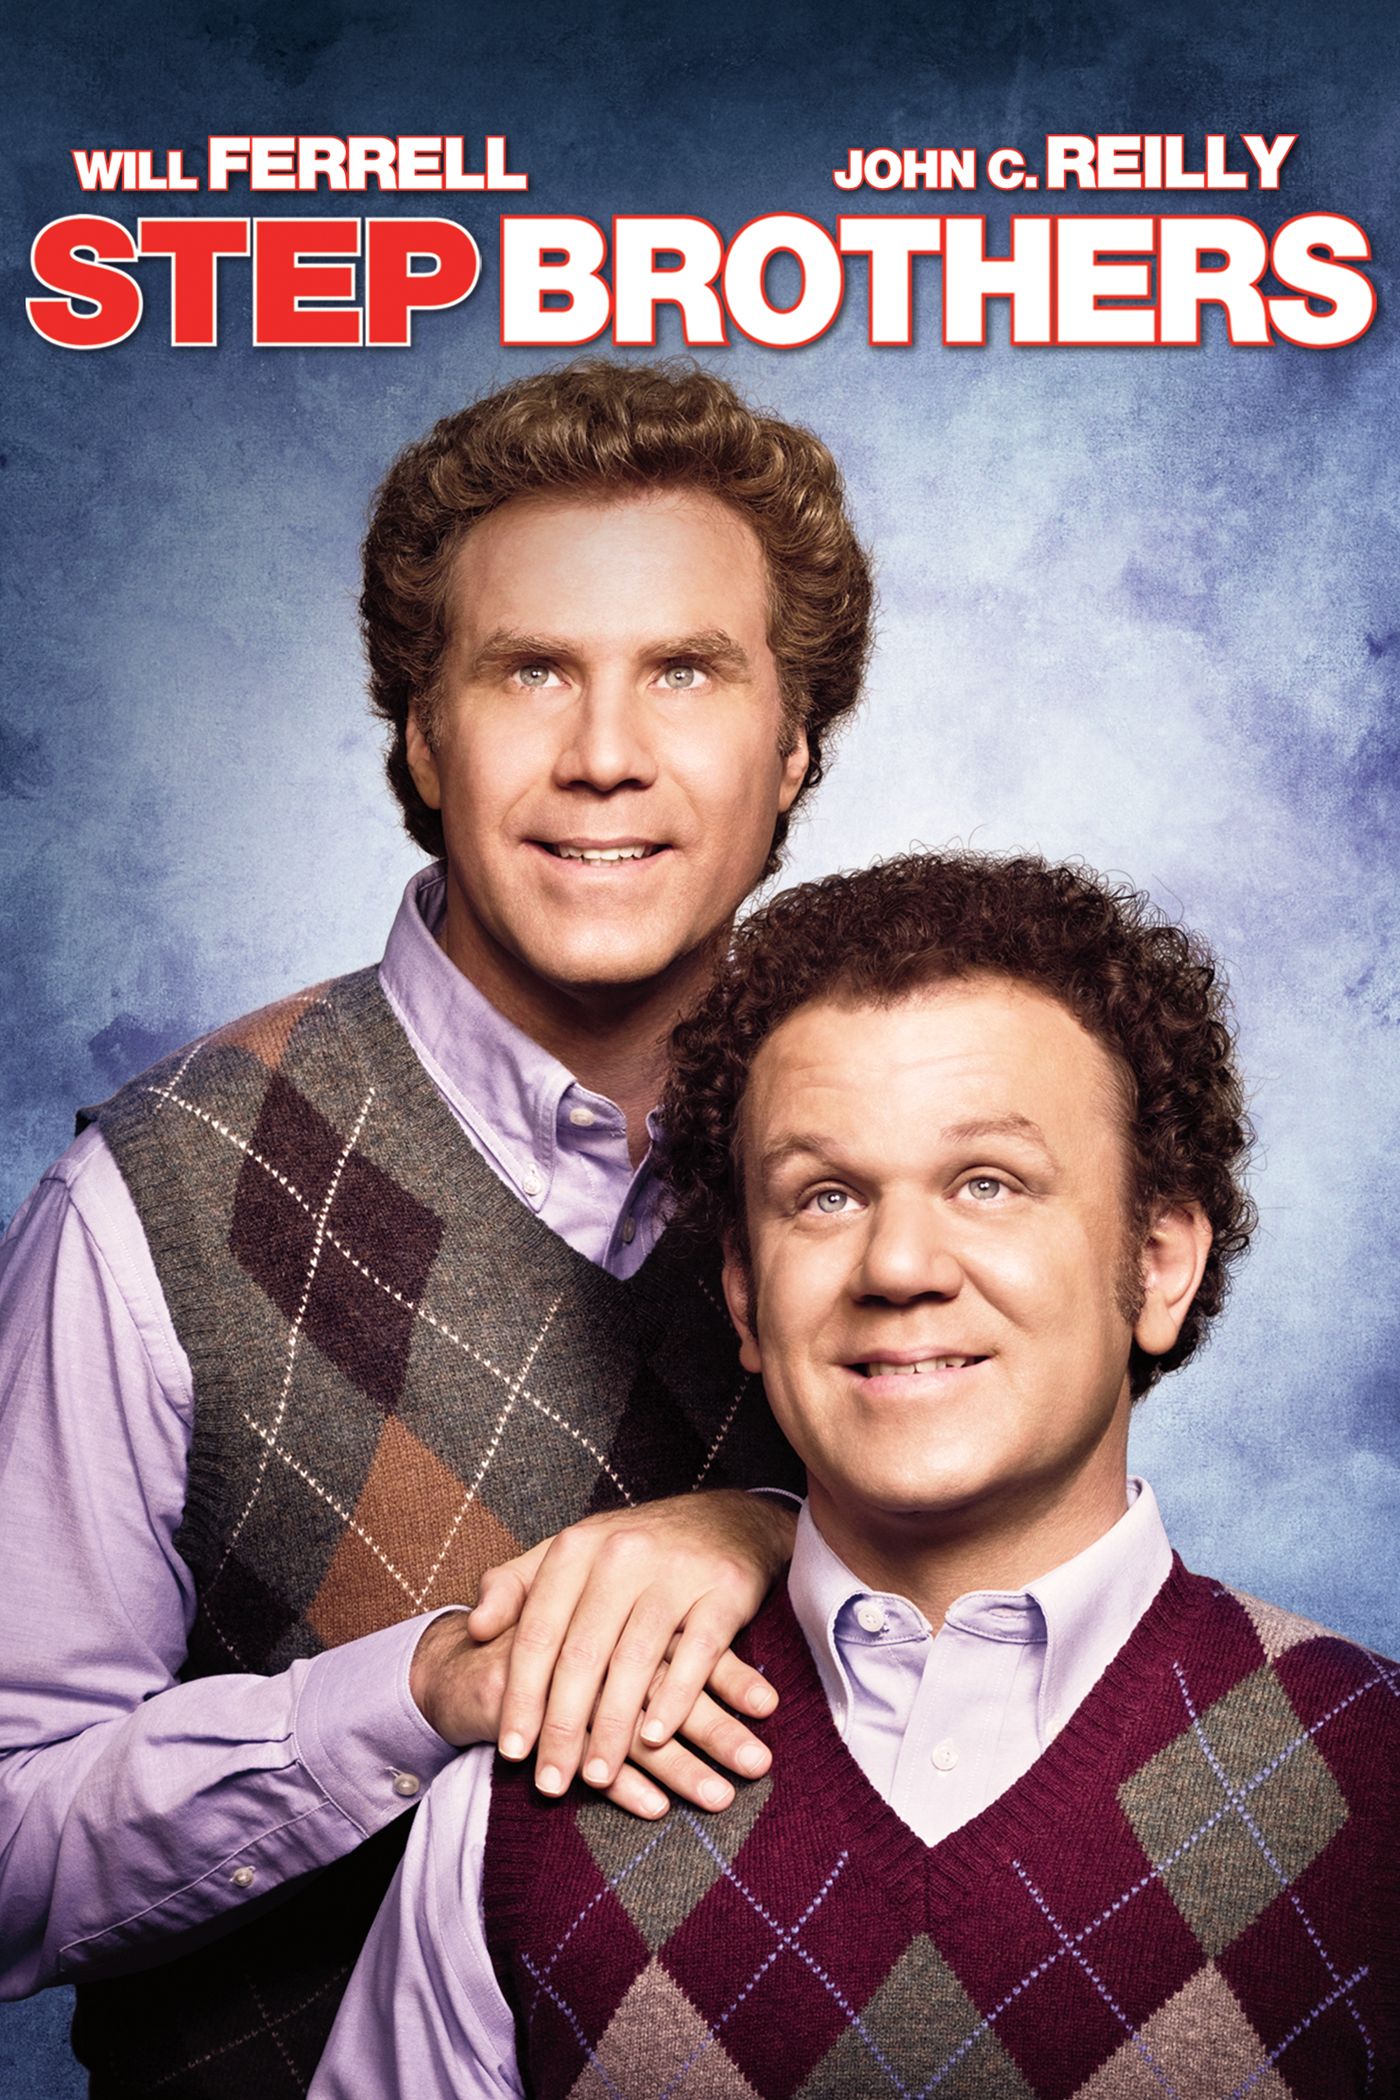 ayodele odunayo recommends step brothers movie download pic